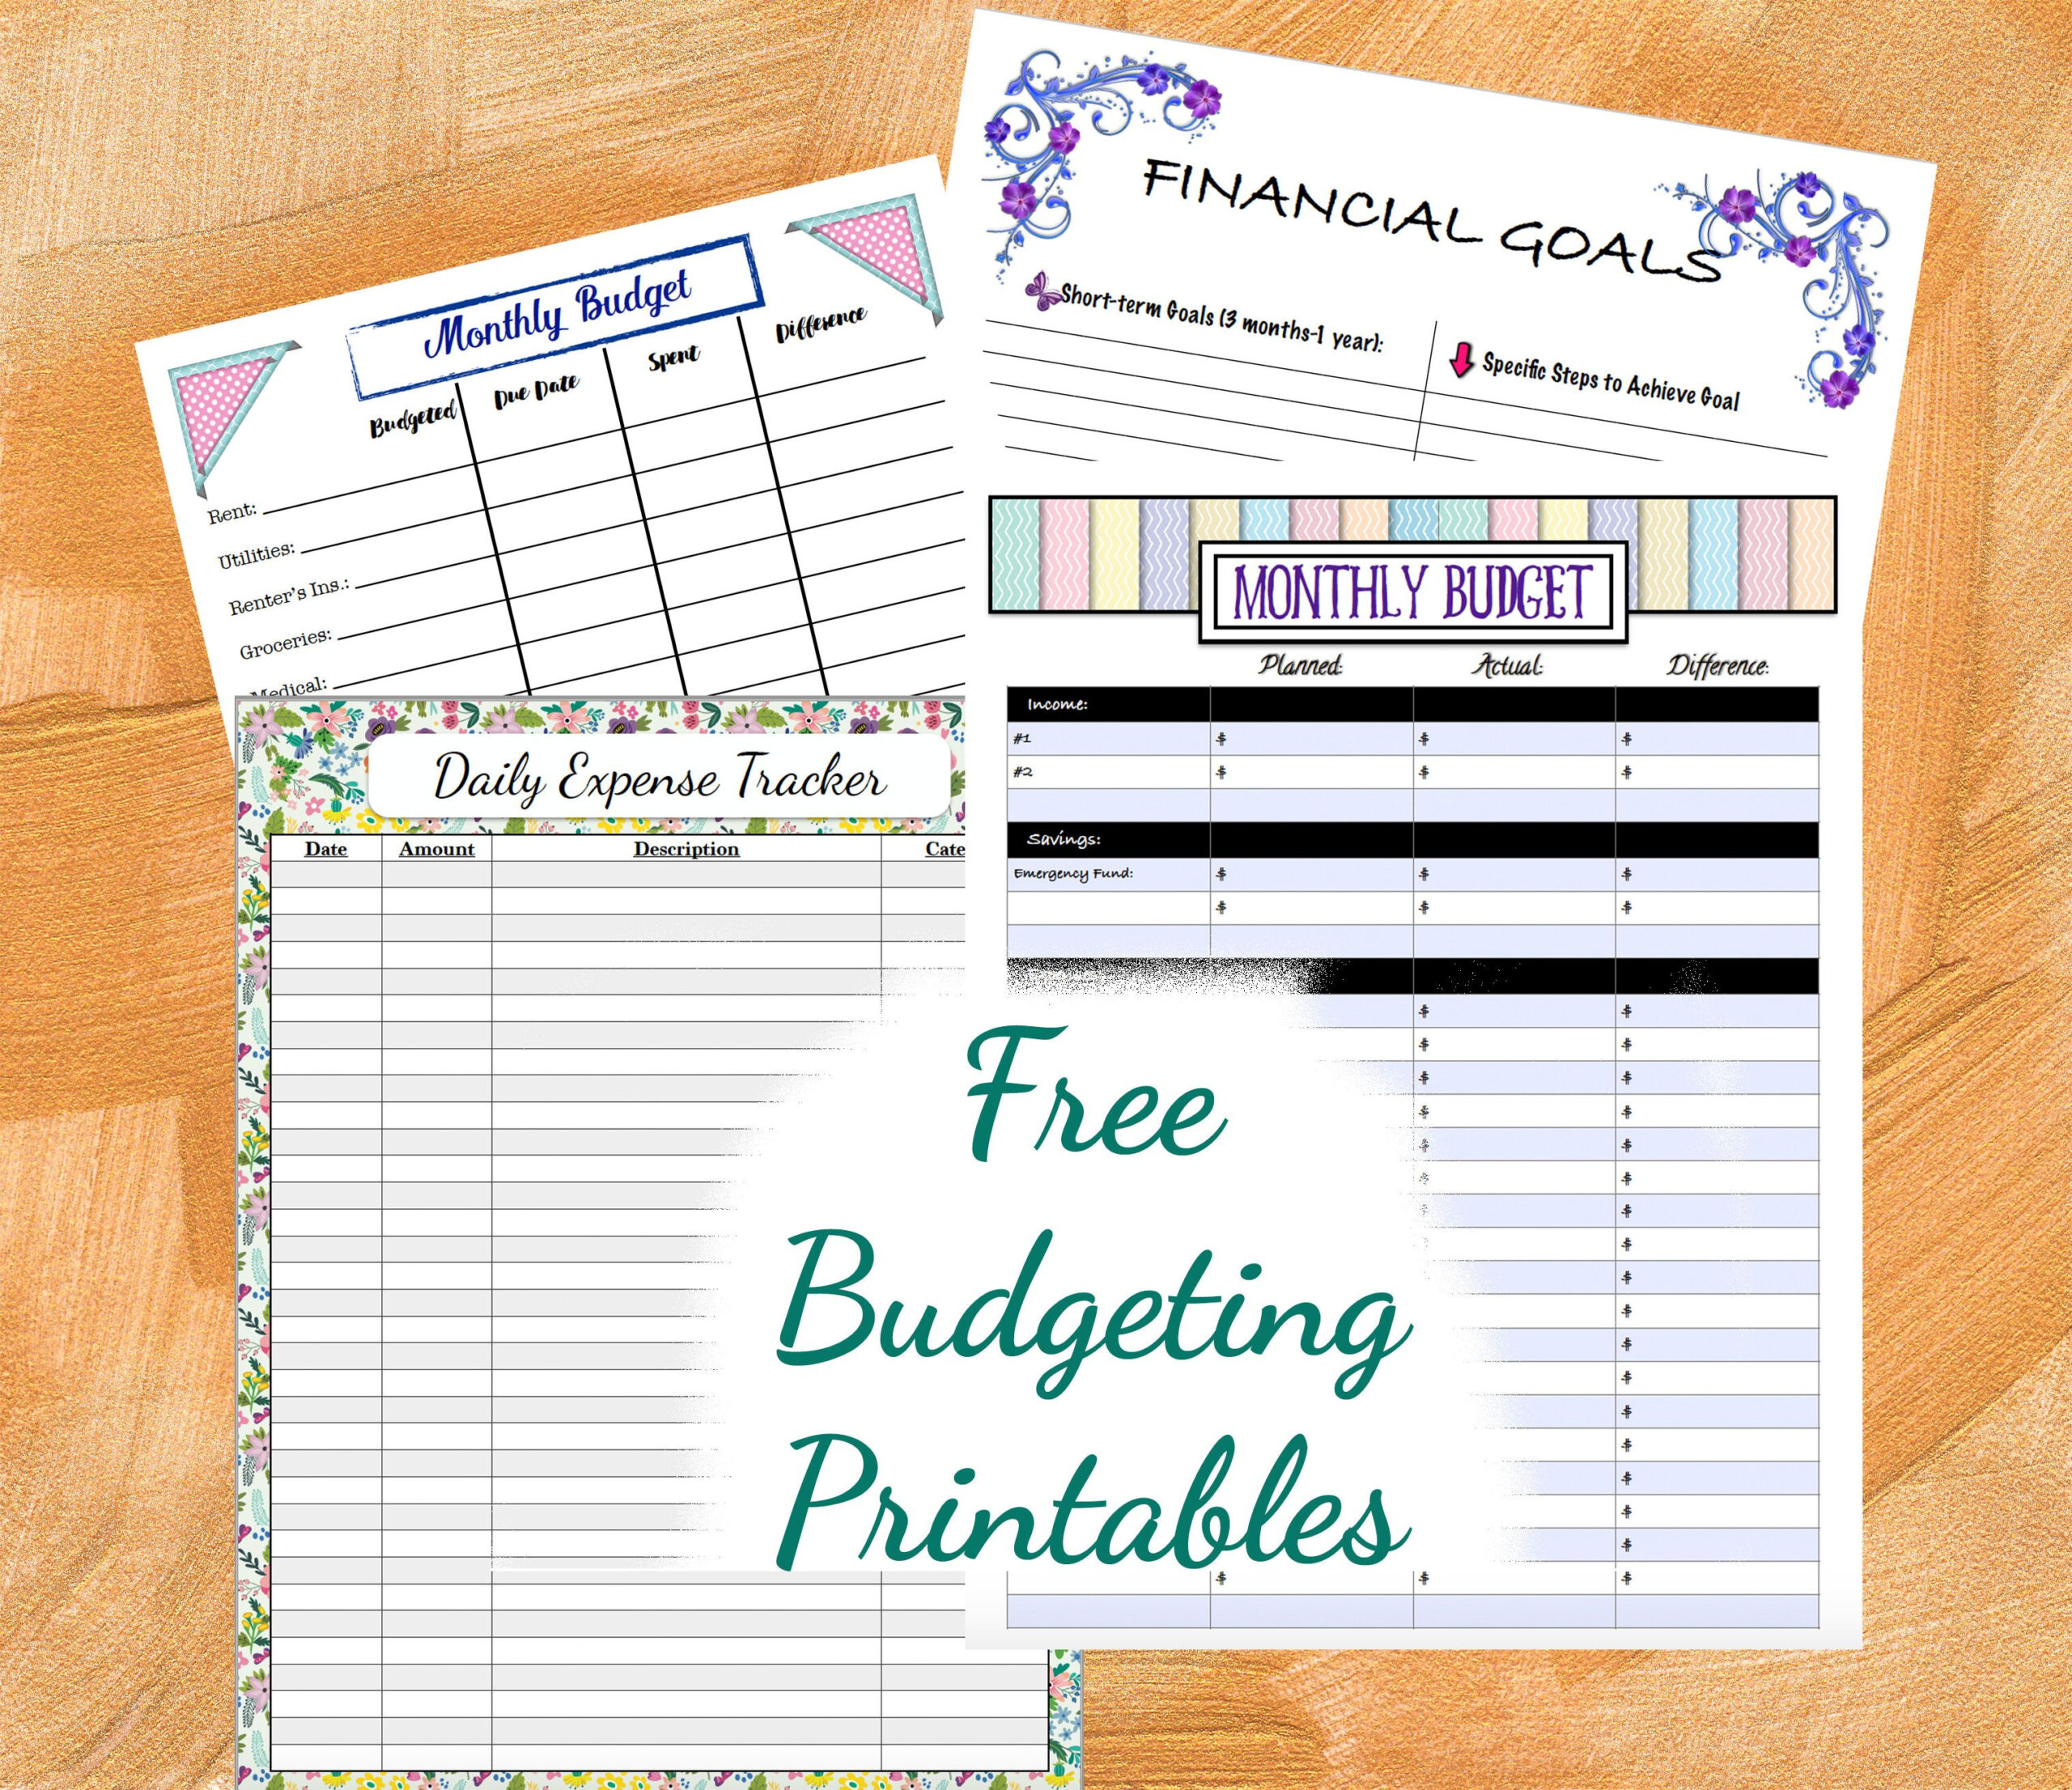 Free Budgeting Printables Expenses Goals Monthly Budget Free 